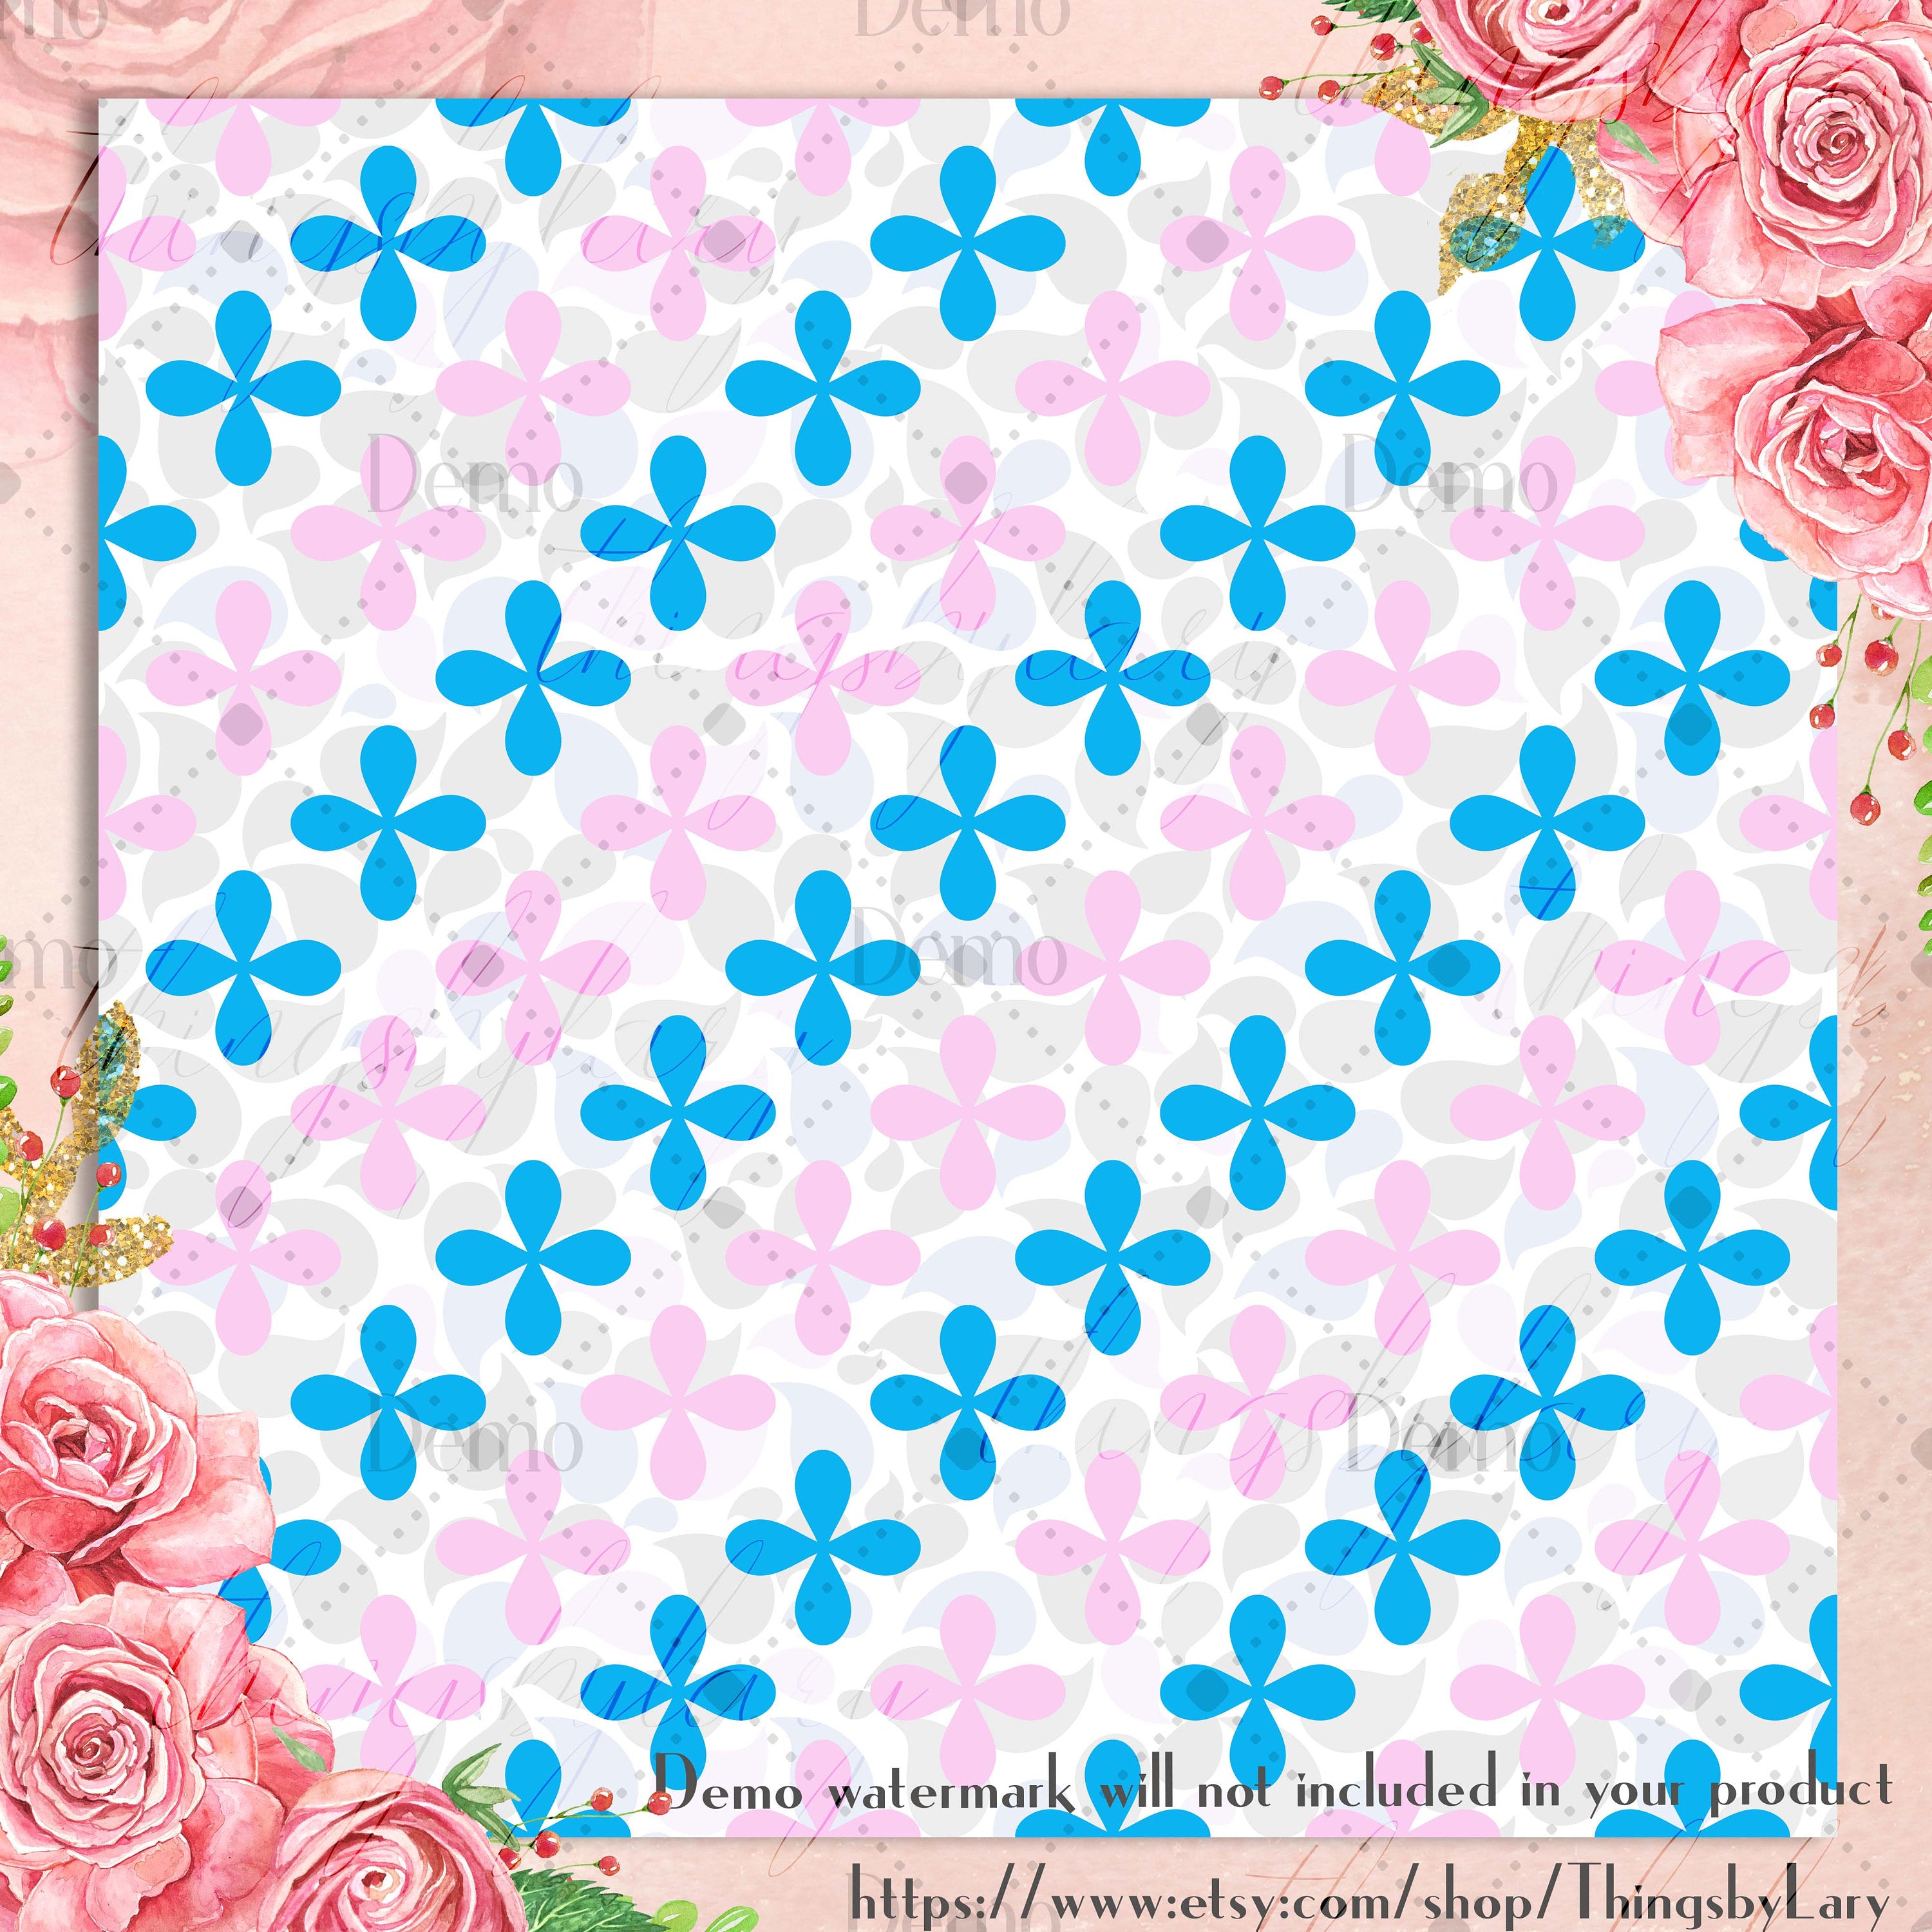 12 Bakery Digital Papers in Frozen Theme Color in 12 inch, Instant Download, High Resolution 300 Dpi, Commercial Use